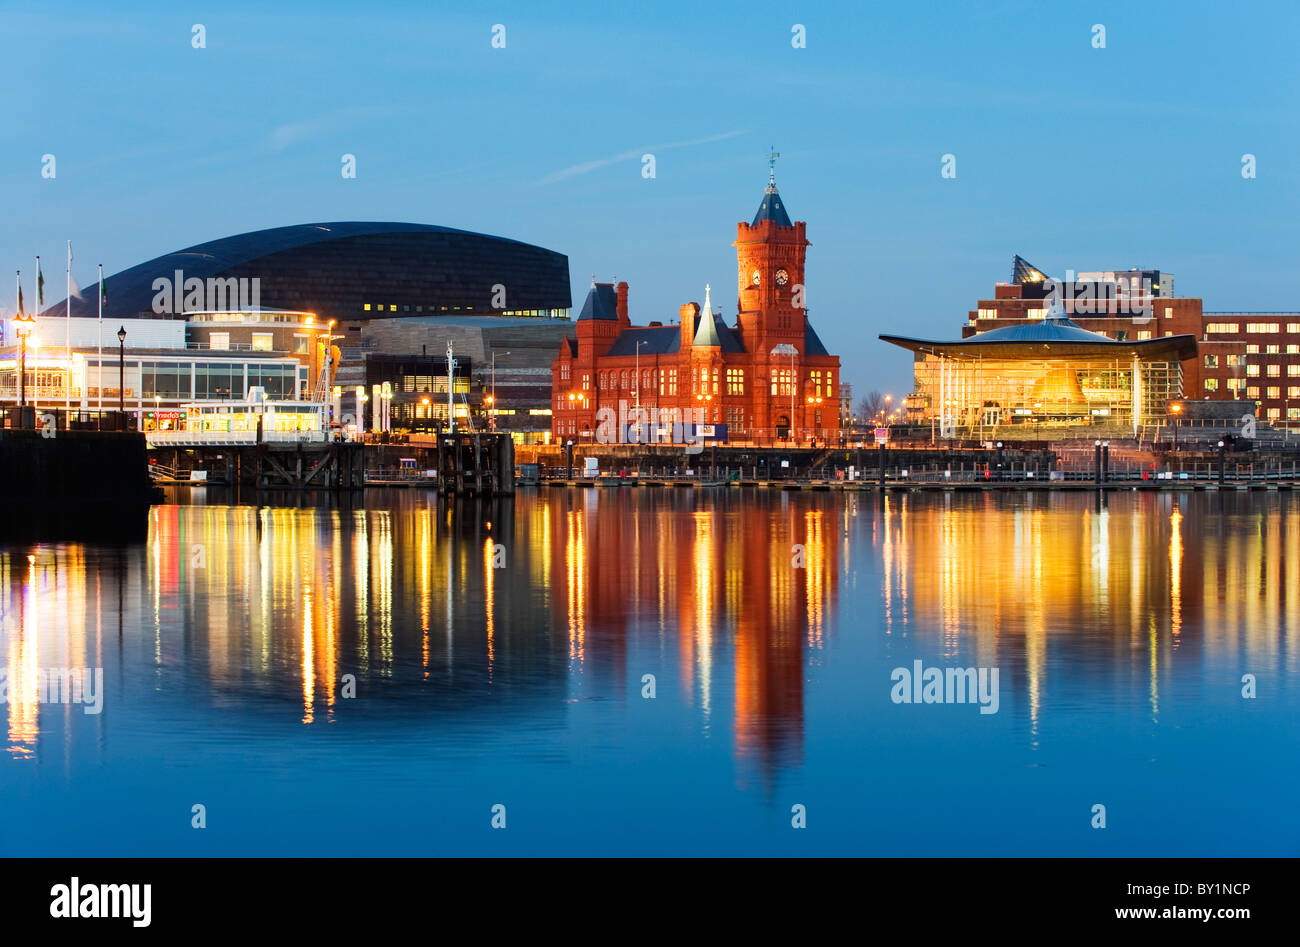 Europe, UK, United Kingdom, Wales, Cardiff, Cardiff Bay, Millennium Centre, Pier Head, Welsh Assembly Building, Norwegian Stock Photo